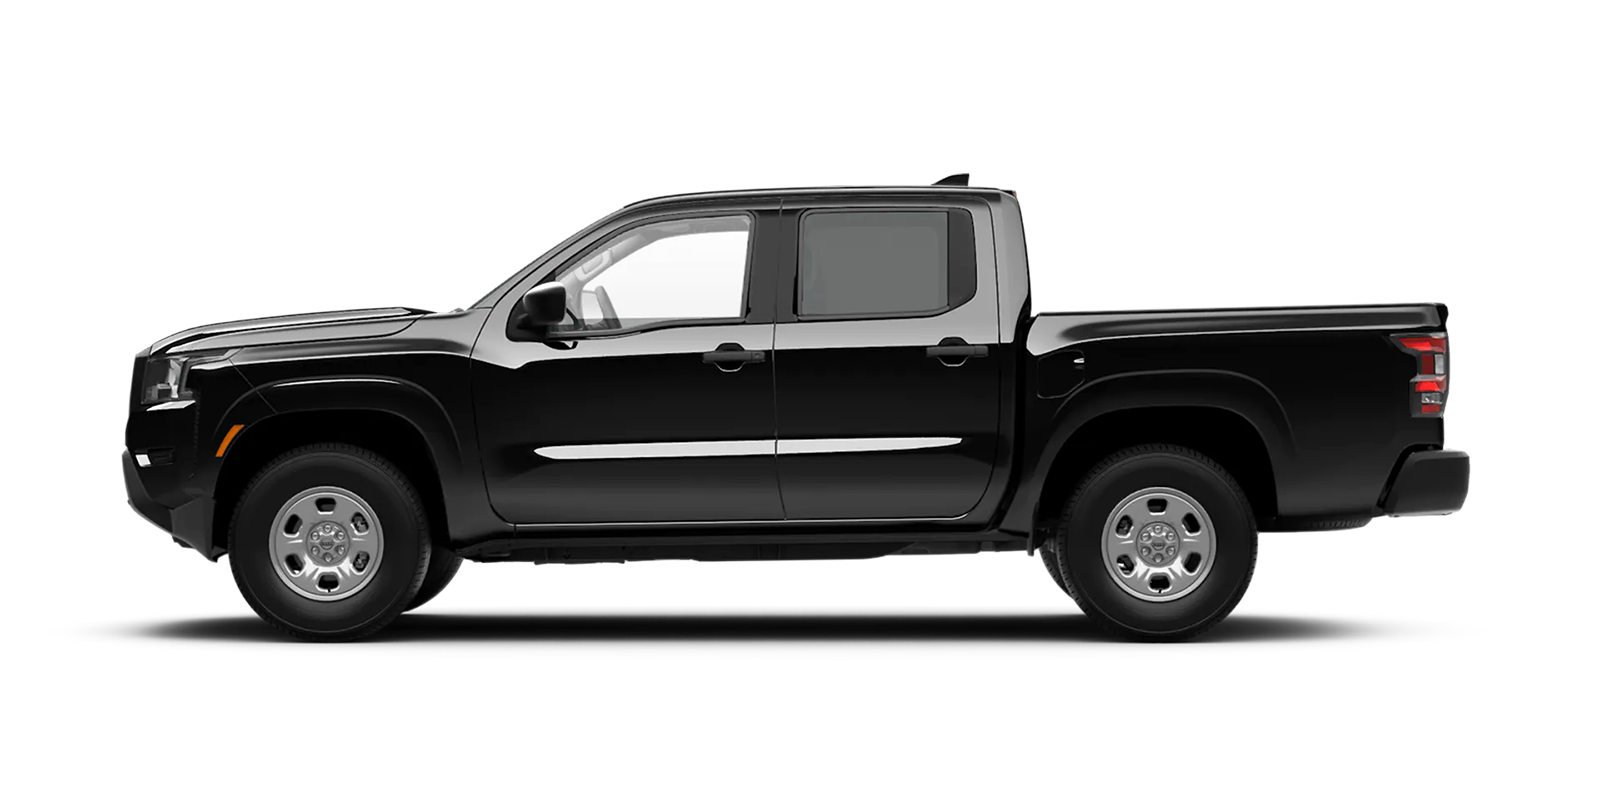 2022 Frontier Crew Cab S 4x2 in Super Black | Cherokee County Nissan in Holly Springs GA